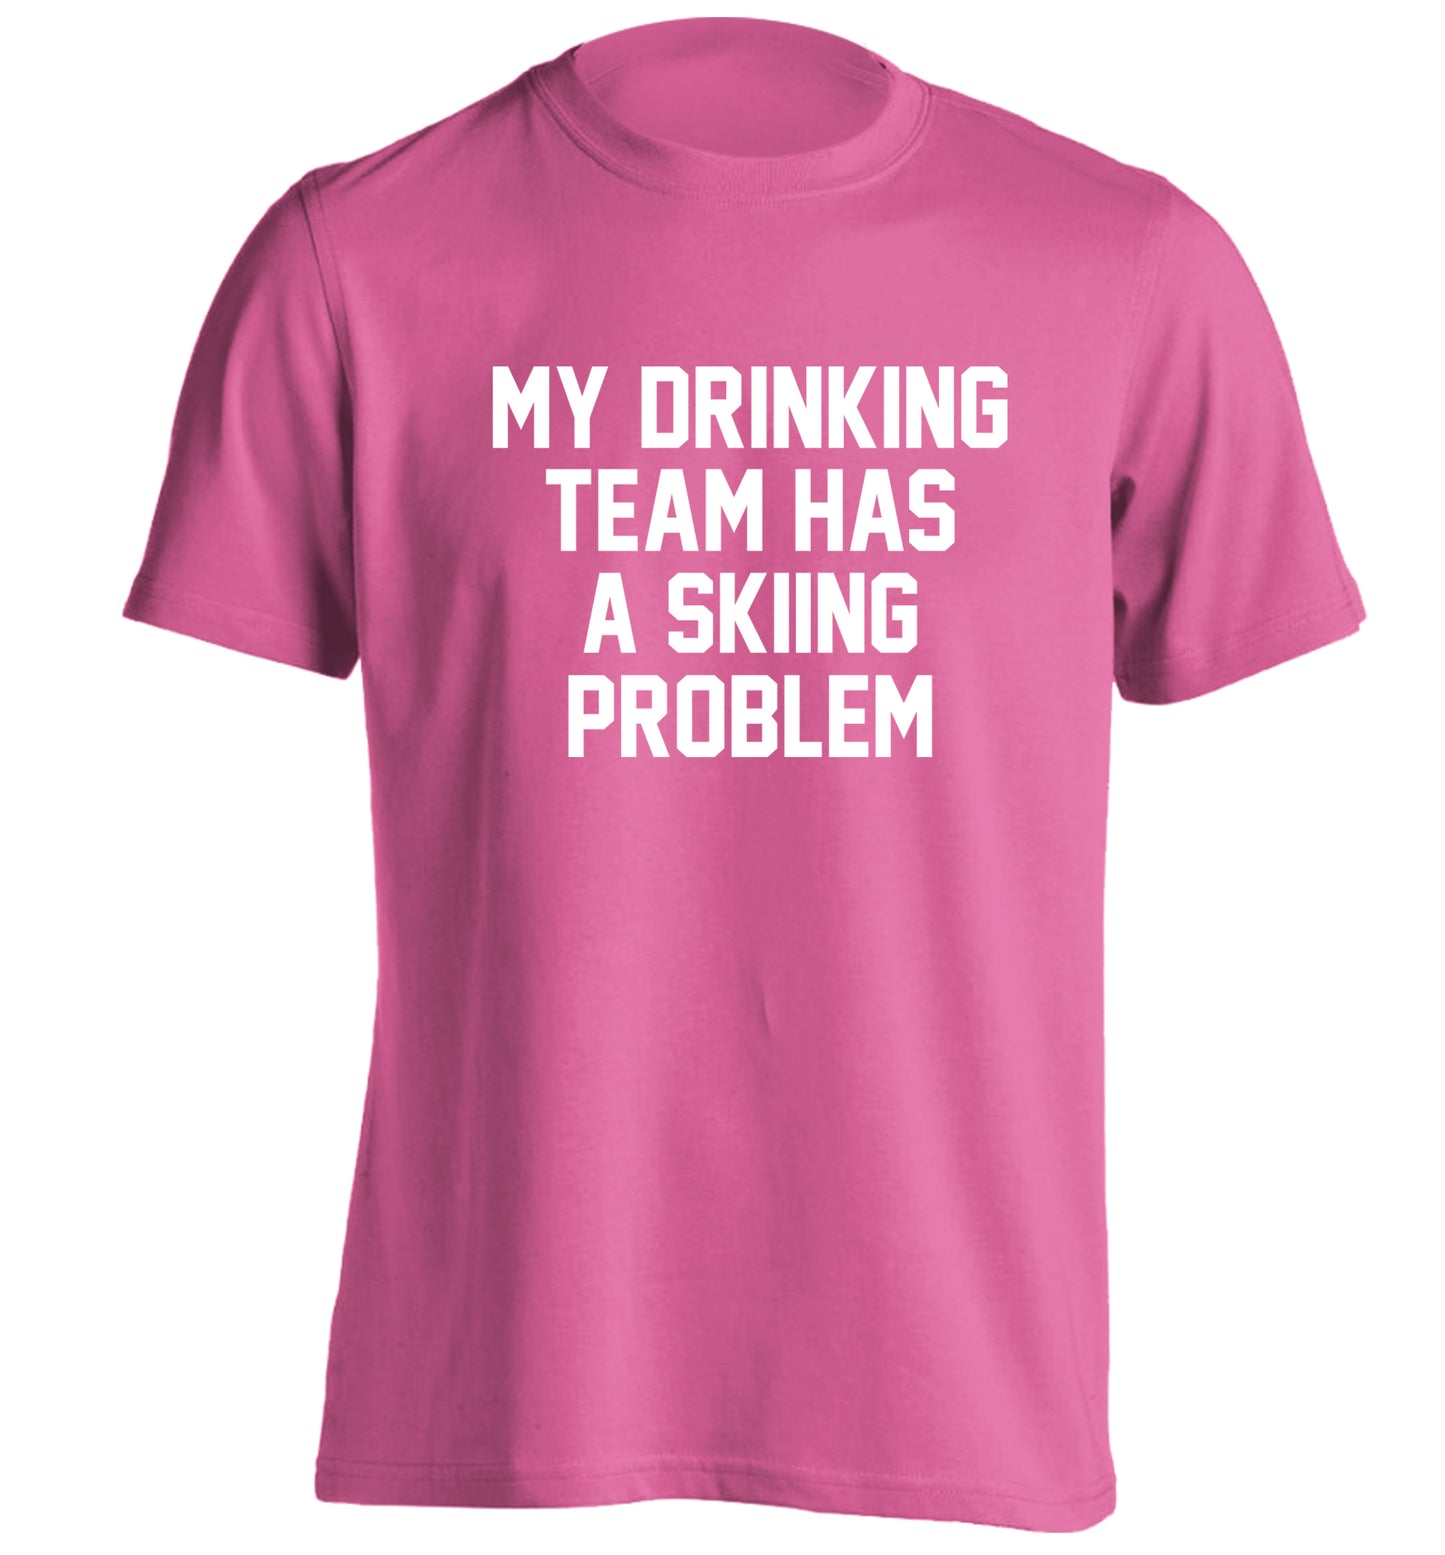 My drinking team has a skiing problem adults unisexpink Tshirt 2XL